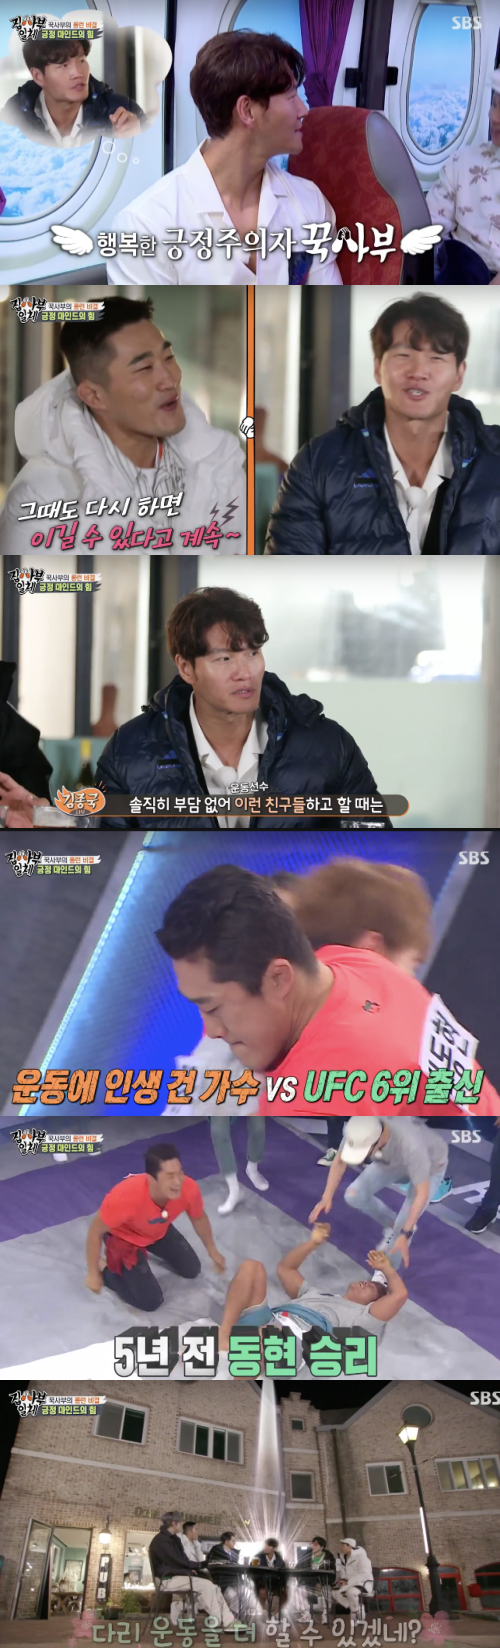 Kim Jong-kook prepared for a substitute trip to LA at All The Butlers, and Kim Dong-Hyun and Revenge were played in five years and added fun.Master Kim Jong-kook appeared on SBS entertainment All The Butlers, which aired on the 18th.Kim Jong-kook, who appeared as a high-protein steel master on the day, said, I will travel to LA for the same heart-warming viewers these days when I can not travel.The members said, Why is LA? Kim Jong-kook also said, I often go to the point where there is a rumor that my wife and child are present, and I can not go because of Corona this year.Kim Jong-kook said, We should be completely over-indulged instead. When the members said, I am excited to hear the real story, it seems to have come.I arrived at English language village in Paju.Kim Jong-kook asked each English language name to introduce his English language name, saying that the English language name was JK.Lee Seung-gi laughed when he said, I am English language name Vincent, a name given by a missionary in junior high school. Vincent Van Gogh is also a traditional name, I am Vincent.The name of the English language teacher, Anyang Academy, gave it to him, said Jung Eun-woo, who introduced him as Felix, and Kim Jong-kook was the weakest Anyang battle.Anyang was a pass for everything. Local currency before immigration examination (?)Kim Jong-kook decided to hand out the dollar for the exchange, and eventually Jung Eun-woo, born in Anyang, was the first to be chosen.They all moved toward the immigration desk as if they had actually entered the country, and they were all interested in saying, It feels like a real foreign country, it smells like an airport.Kim Jong-kook first demonstrated that you have to be a fool in entertainment, and you will make it funny with sudden events.Kim Dong-Hyun then demanded the money from Top Model, a suspicious examiner.If you can not pay the ticket in 30 seconds, you have to get winded. In the end, Kim Dong-Hyun failed and could not enter.Next was Yang Se-hyeong, the Top Model.In the same situation, Yang Se-hyeong shouted tip and asked him to take all the change, and he laughed at the explosion of I have bit coin.Shin Sung-rok was the Top Model; Shin Sung-rok told him to prove his job, and suddenly he showed off his musical on the spot.Lee Seung-gi and Jung Eun-woo also proved themselves and passed the entry screening; Kim Dong-Hyun was also able to succeed by Top Model.He went on to travel under the name Welcome to Masterwood, and Kim Jong-kook went to a restaurant saying, Its just a matter of mind.In fact, when a foreigner was ordered to English language, all said real foreign feeling and Kim Dong-Hyun laughed when he said ears are opening.Kim Jong-kook told the English language vocabulary on the spot, and Lee Seung-gi asked him about the opportunity to study English language, saying, Kim Jong-kooks English language classroom, LA Kim.Kim Jong-kook said, I always felt uneasy and disliked the disadvantage of not knowing my mothers trip, English language, and after 30 years I started studying English language. Everyone was surprised that it is not easy to travel with my mother.Kim Jong-kook said, I fit that well, my mother likes to exercise, I go to the gym after I go to the golf practice field.Kim Jong-kook said, I will do a pop song. Bruno Mars song was selected and the atmosphere was warm with a sweet voice.The feeling is moist, they all admired.Above all, Kim Jong-kook mentioned the game that he had suffered defeat humiliation in wrestling with Kim Dong-Hyun five years ago.A thigh-revenge wrestling match with the pride of the two unfolded, and Kim Jong-kook eventually won the strategy.Kim Jong-kook moved to the hostel and opened a one-point exercise lesson, saying, If you are tired, you have to exercise deliciously.Capture All The Butlers Broadcast Screen